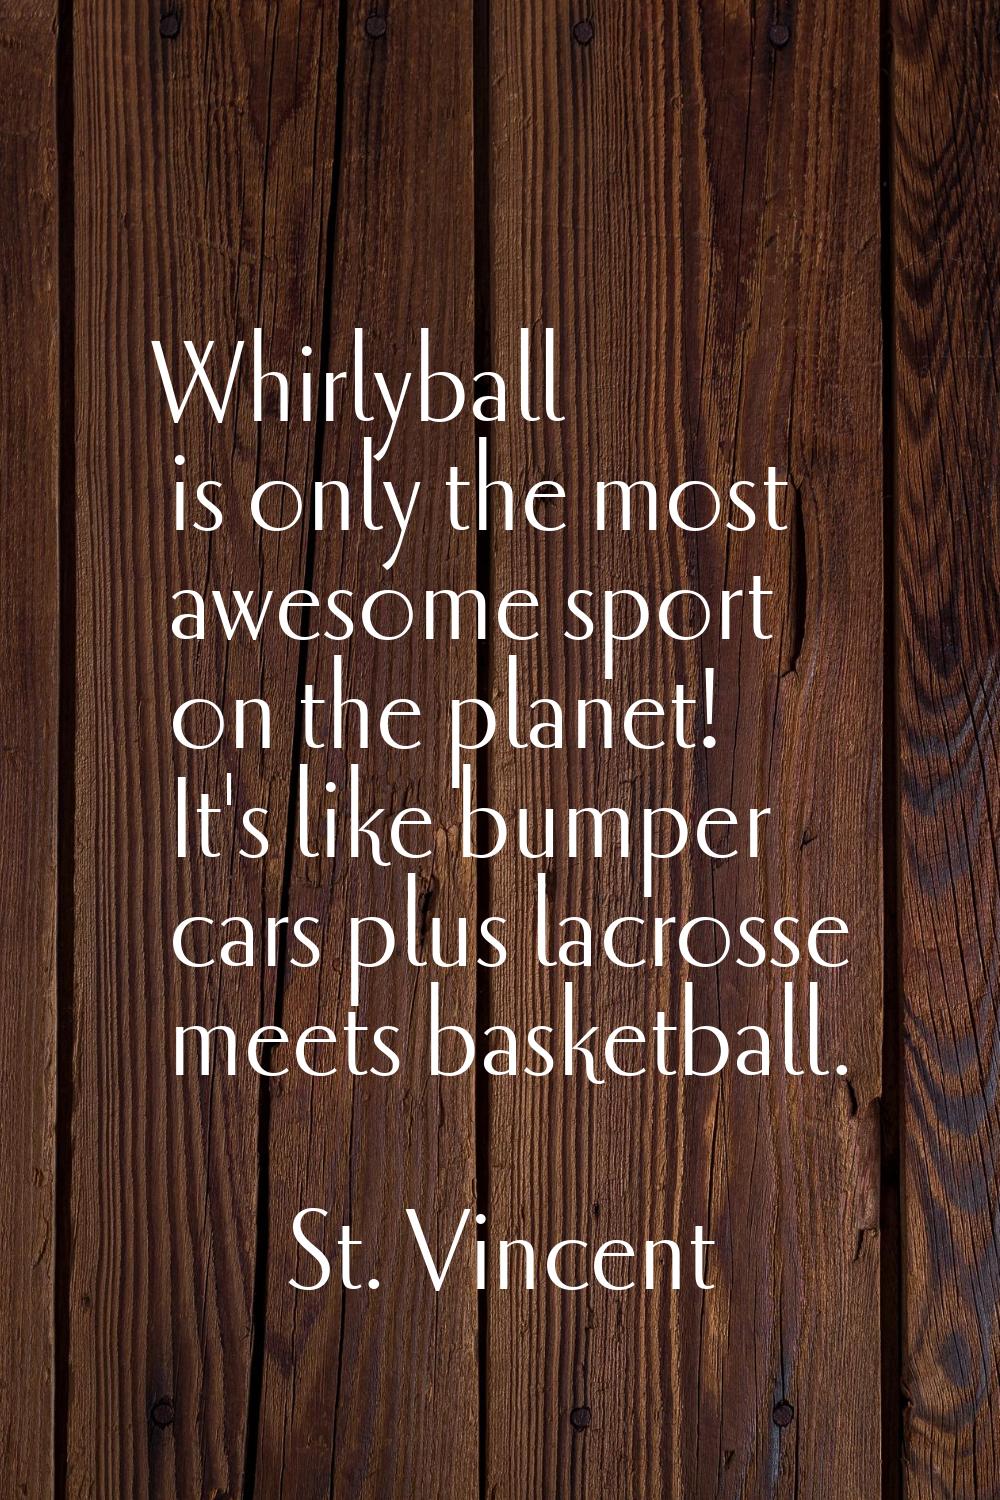 Whirlyball is only the most awesome sport on the planet! It's like bumper cars plus lacrosse meets 